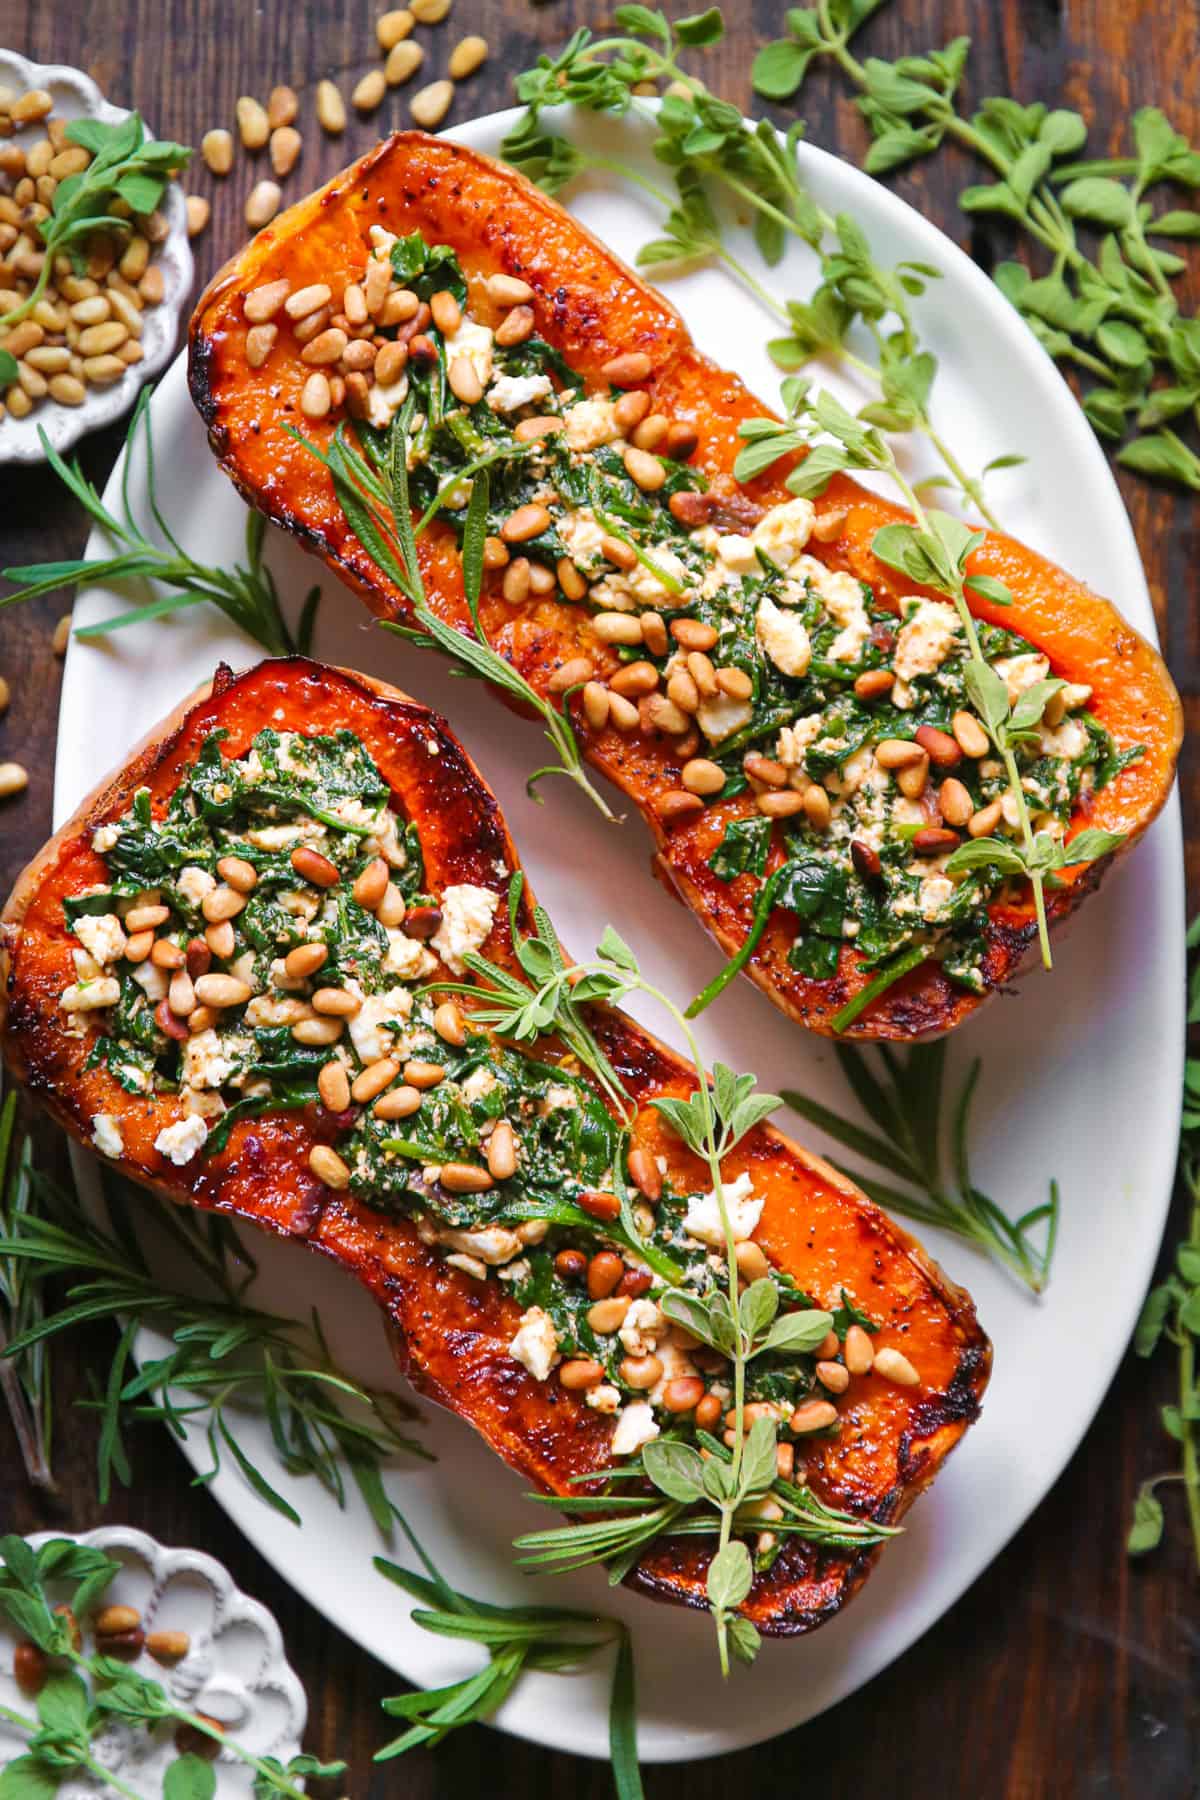 Roasted Butternut Squash Halves (two) stuffed with Feta and Spinach, topped with pine nuts - on a white platter.